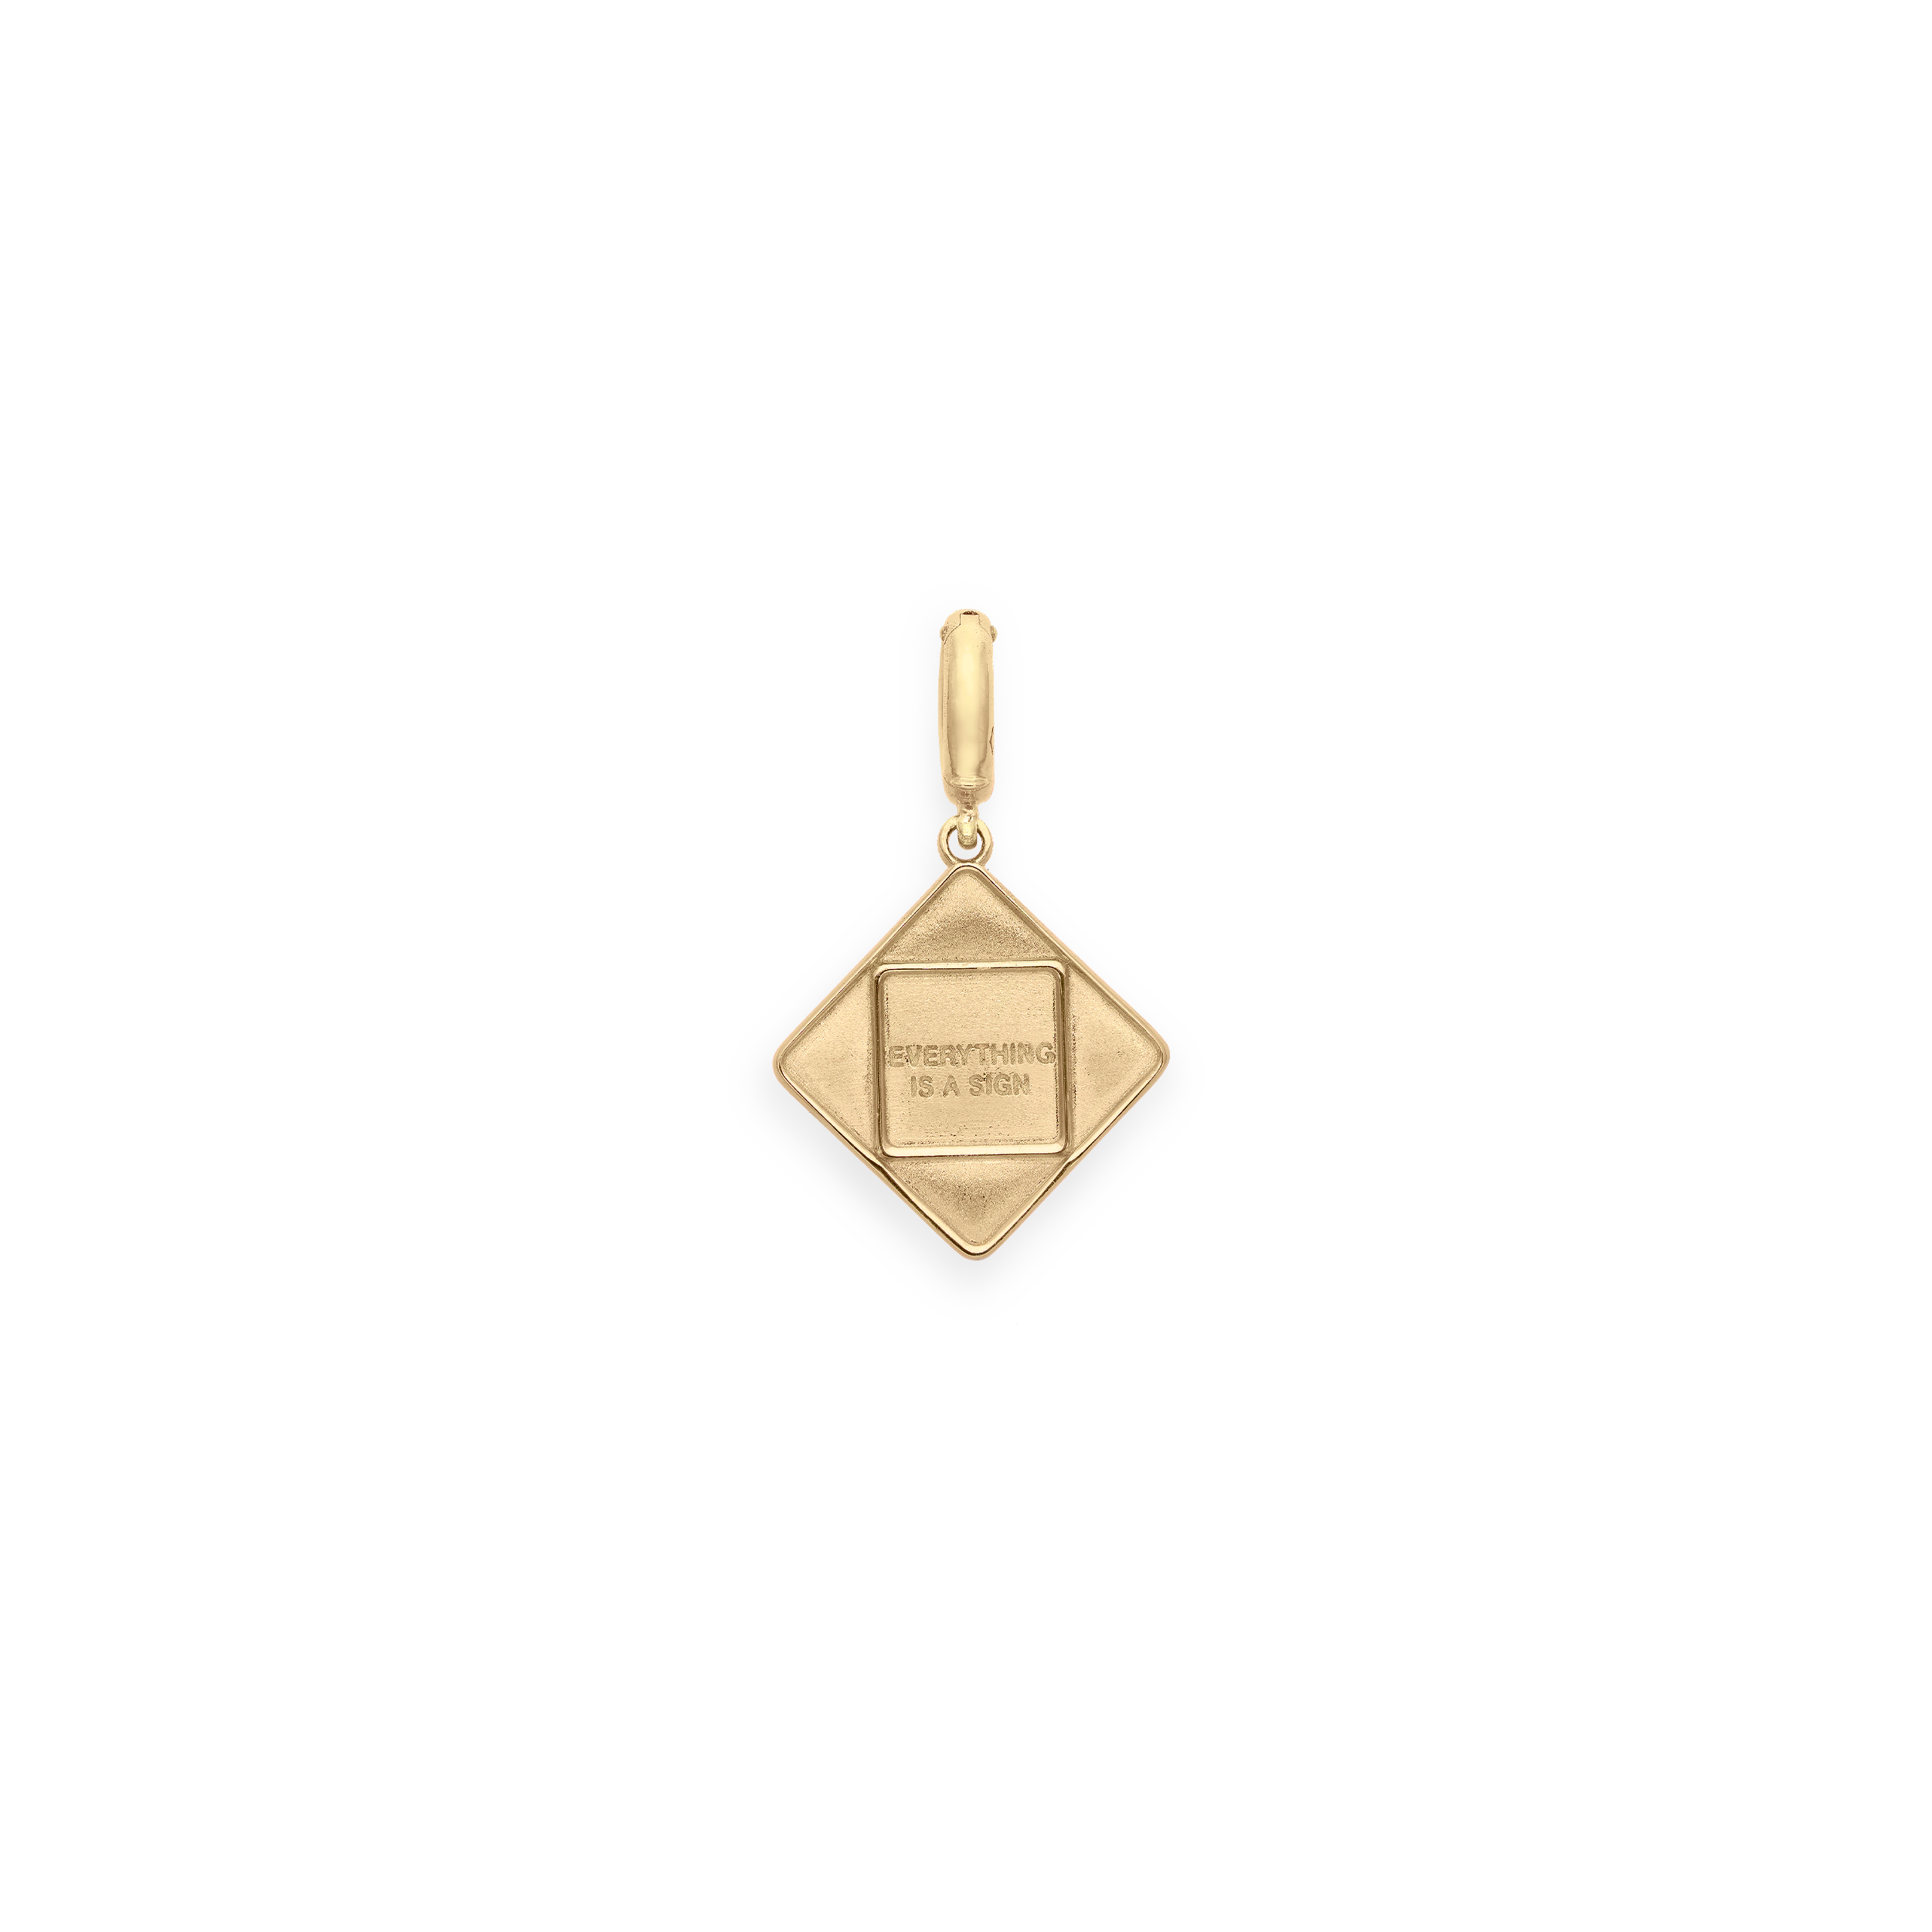 Bruno Yellow Gold Baby "Everything is a Sign" Pendant